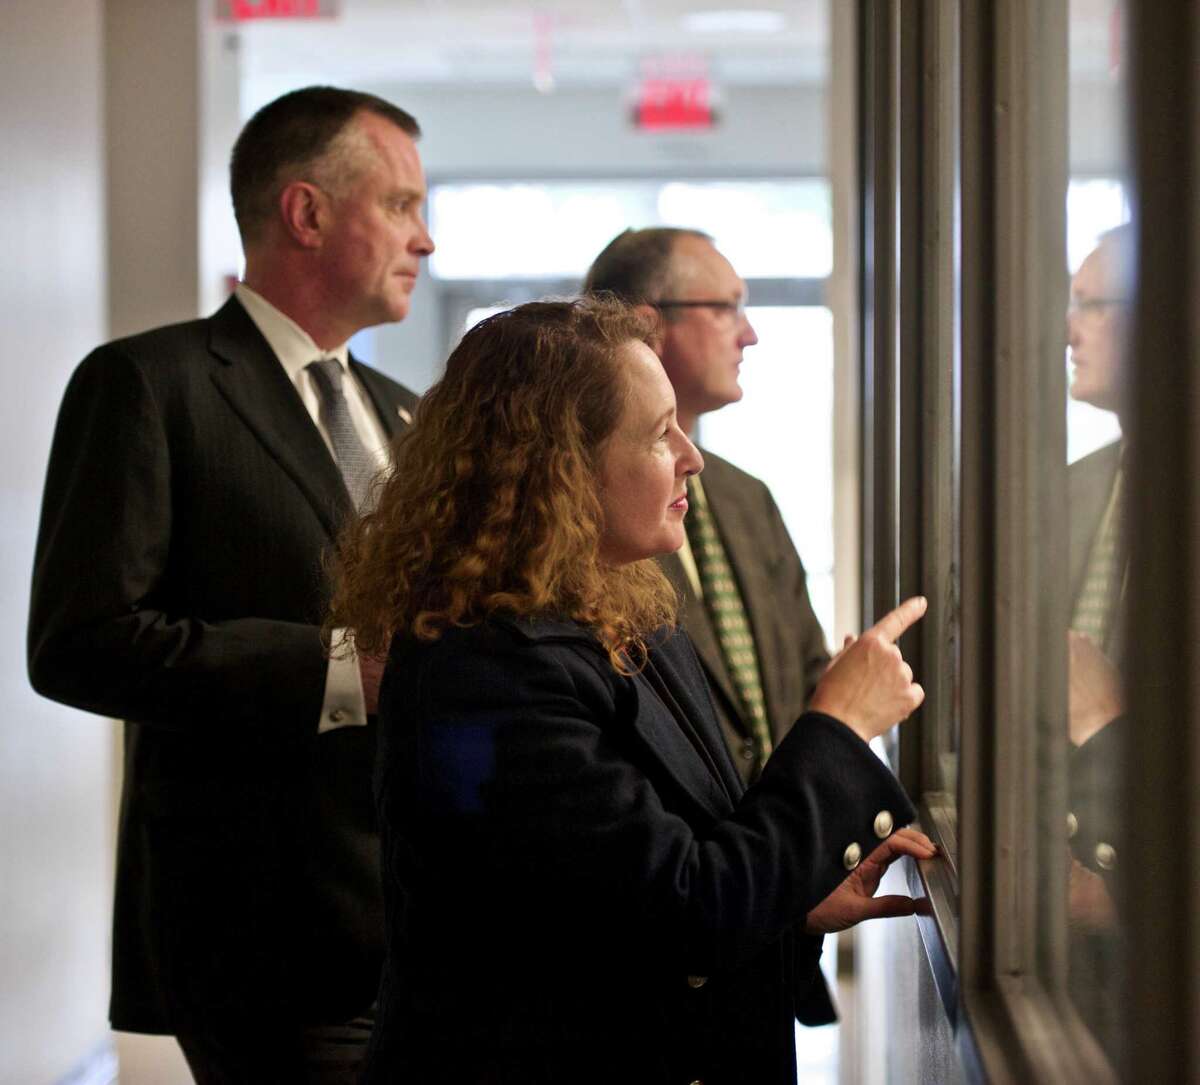 Paul Fonteyne, President and CEO of BIUSA, left, and James Baxter, Senior VP of Development, R&D, with U.S. Representative Elizabeth Esty, 5th District of Connecticut, during a tour of the Boehringer Ingelheim USA Corporation pilot research building at their Danbury, Conn, campus on Wednesday, April 8, 2015. They are looking through windows into a robotics lab.